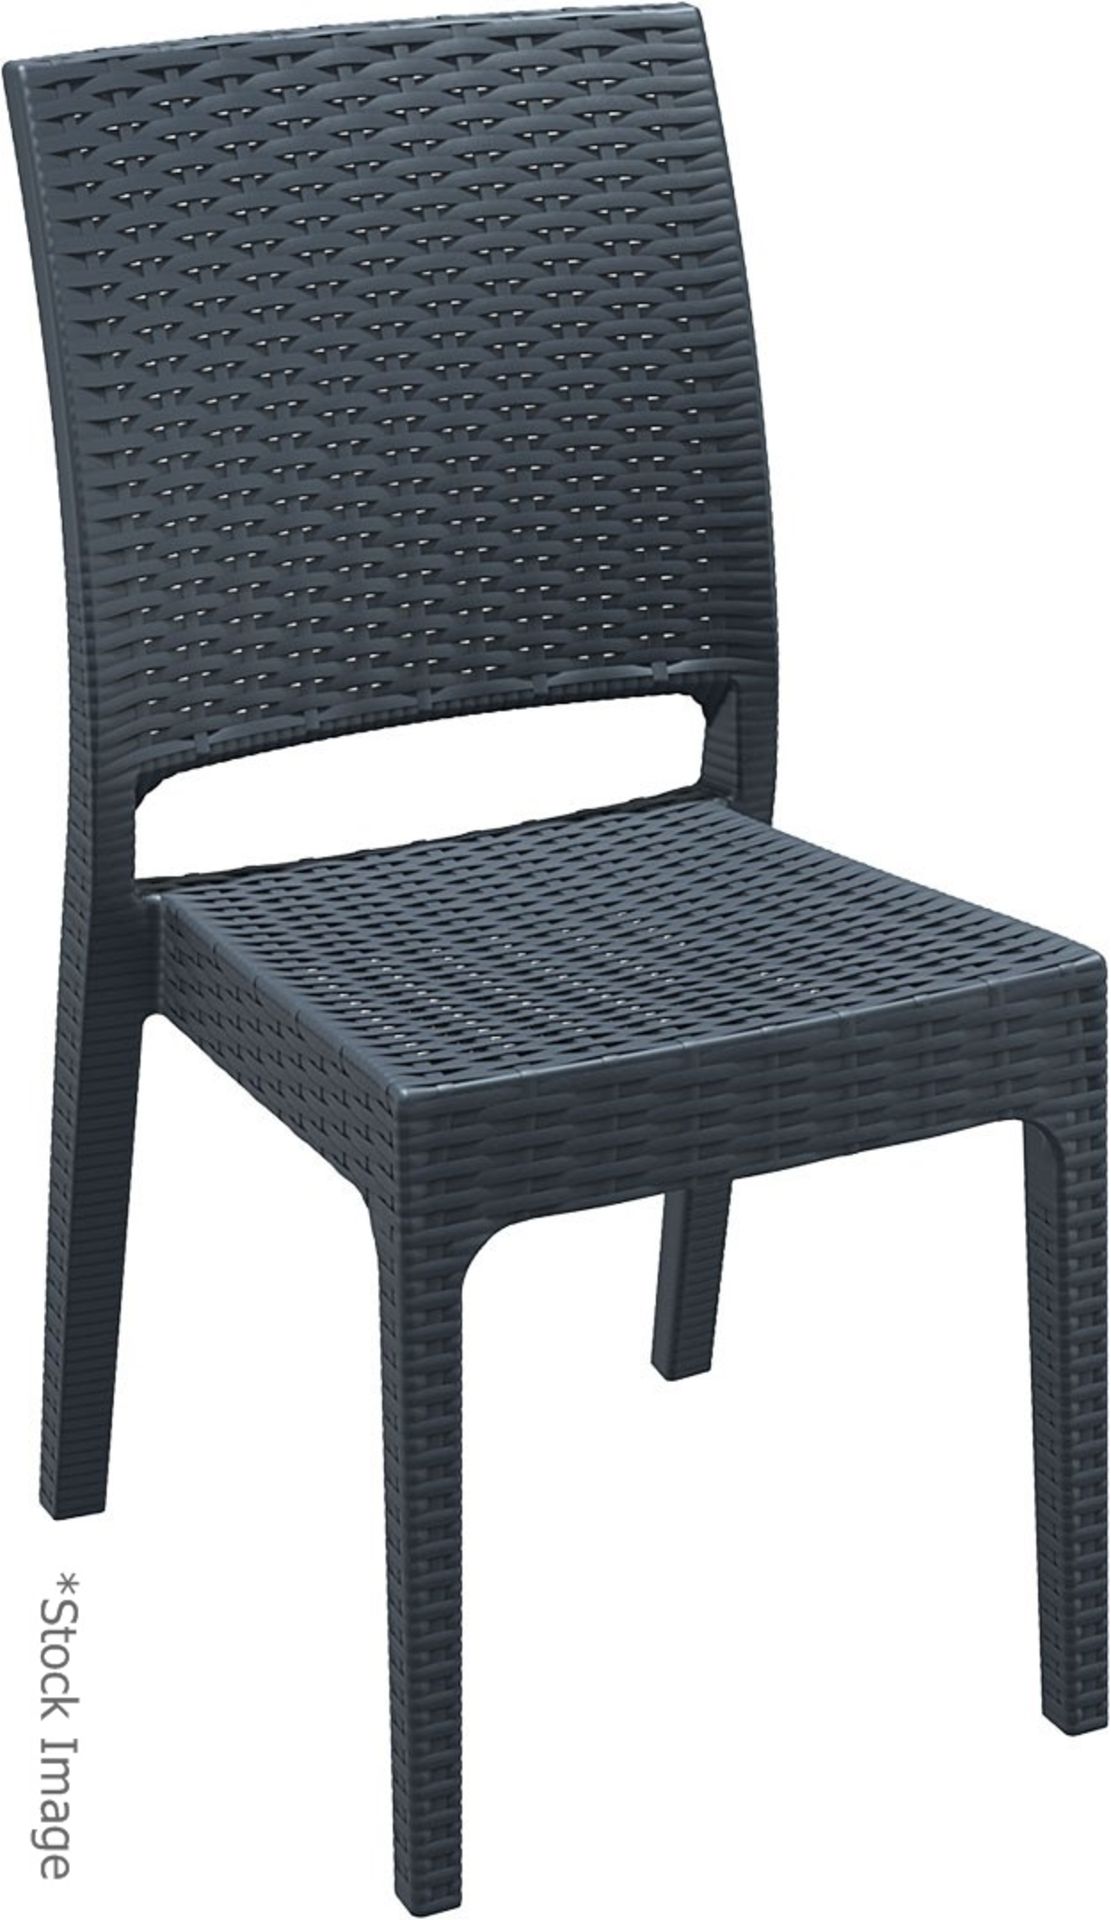 8 x Siesta 'Florida' Rattan Style Garden Chairs In Dark Grey - Suitable For Commercial or Home Use - - Image 16 of 21